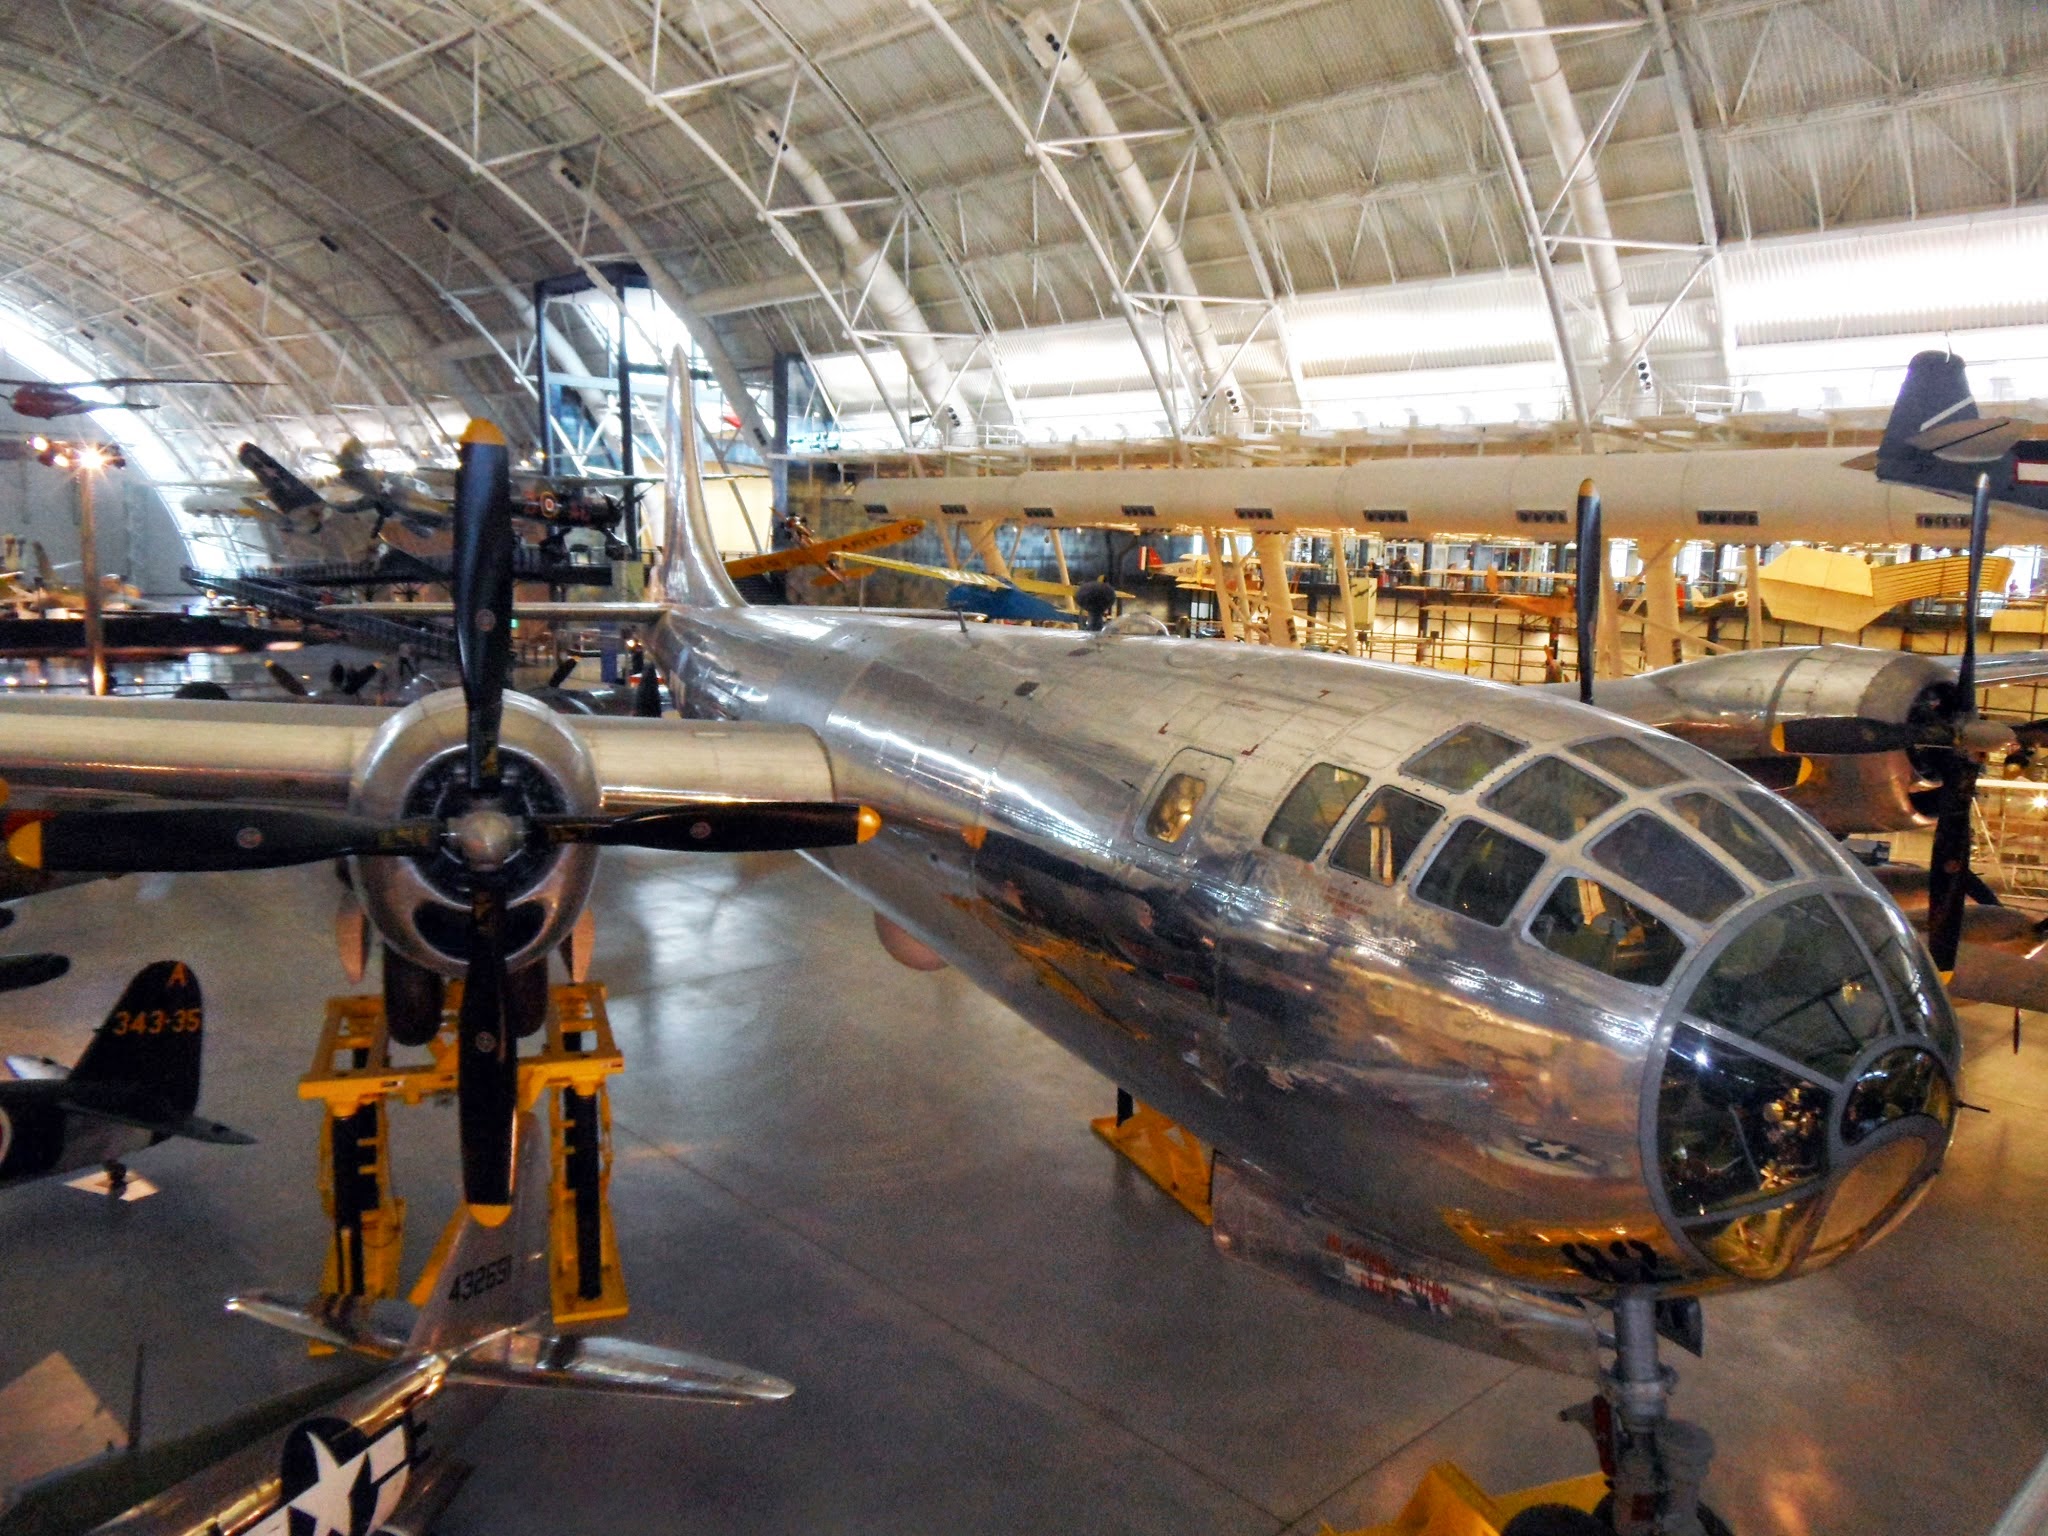 Restoring the enola gay and a point in history